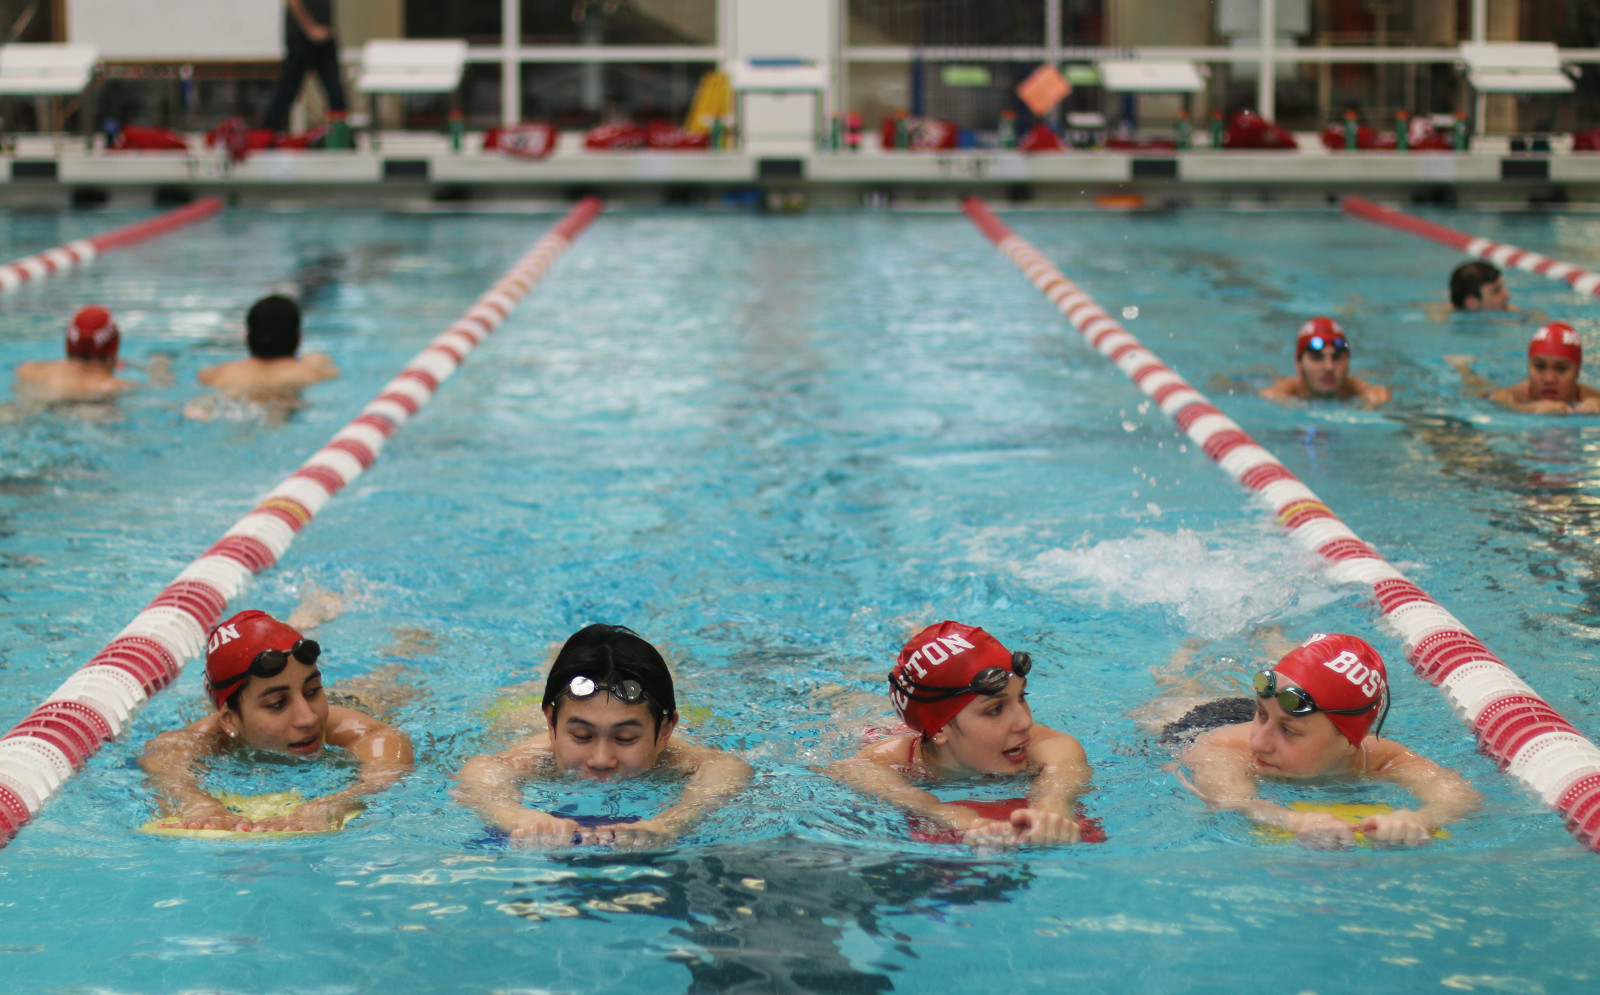 Although Boston University has decided to cut all future men's swimming and diving scholarships and 71 percent of women's swimming and diving scholarships, scholarships will not be taken away from the 50 student-athletes currently on the team. PHOTO BY OLIVIA NADEL/DAILY FREE PRESS STAFF